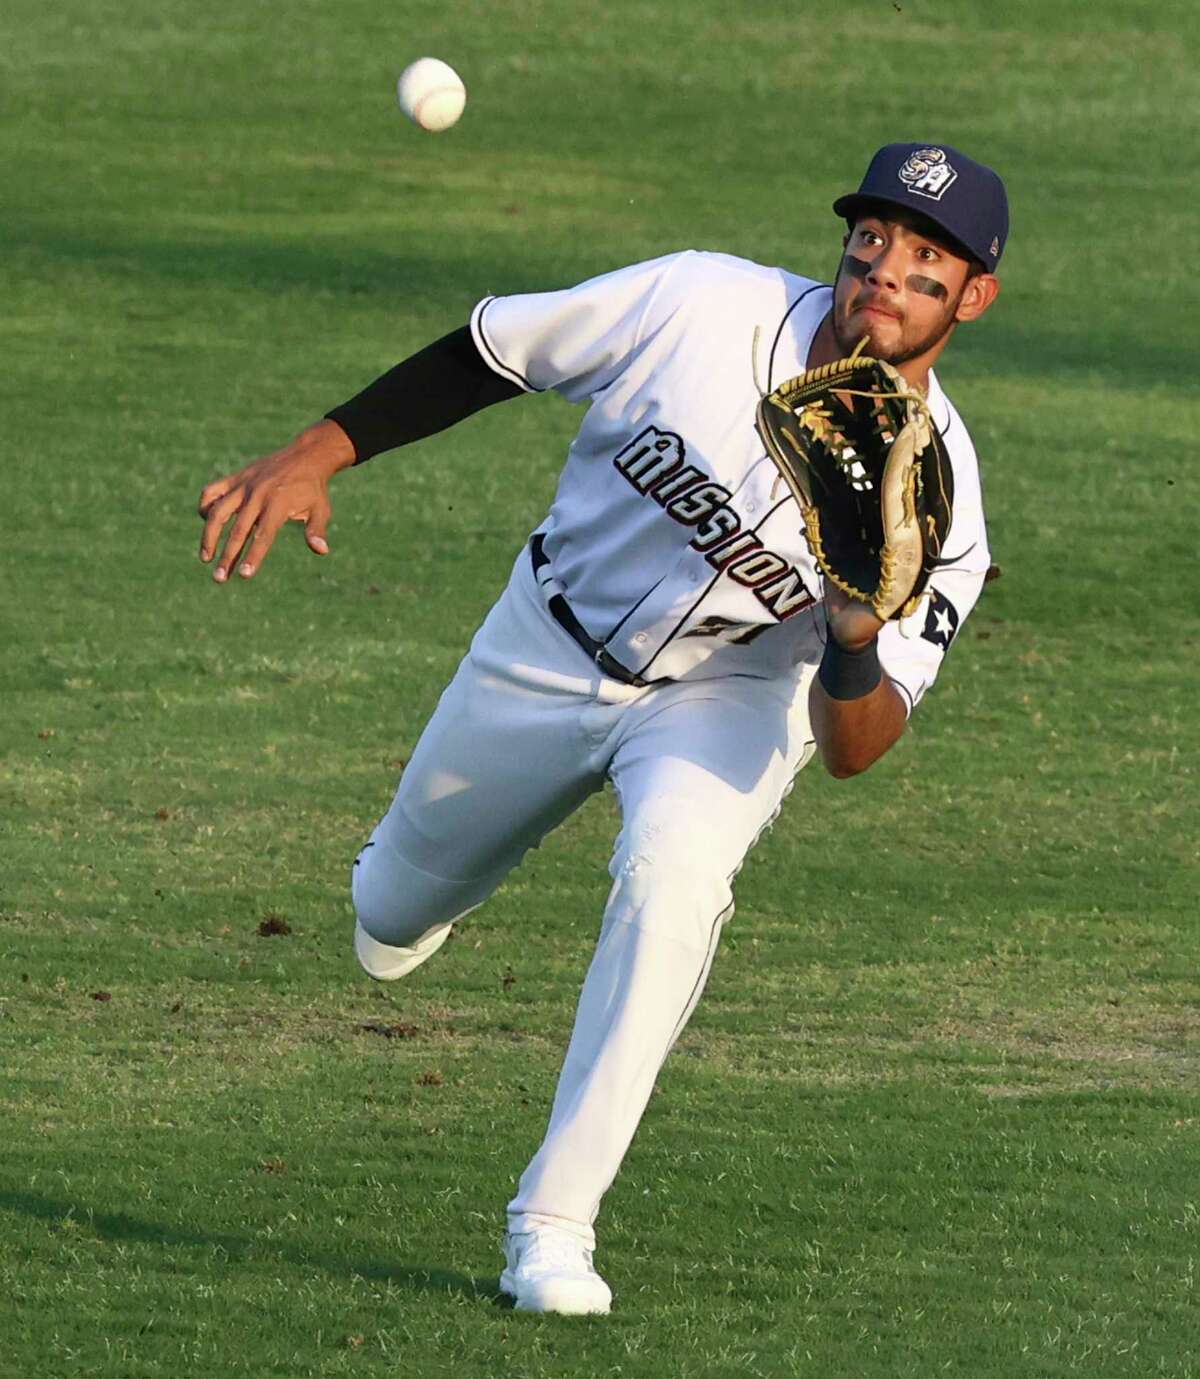 San Antonio Missions' Augustin Ruiz (27) hustles to make a catch in the first inning during their home opener at Wolff Stadium against the Frisco Roughriders on Tuesday, Apr. 12, 2022.